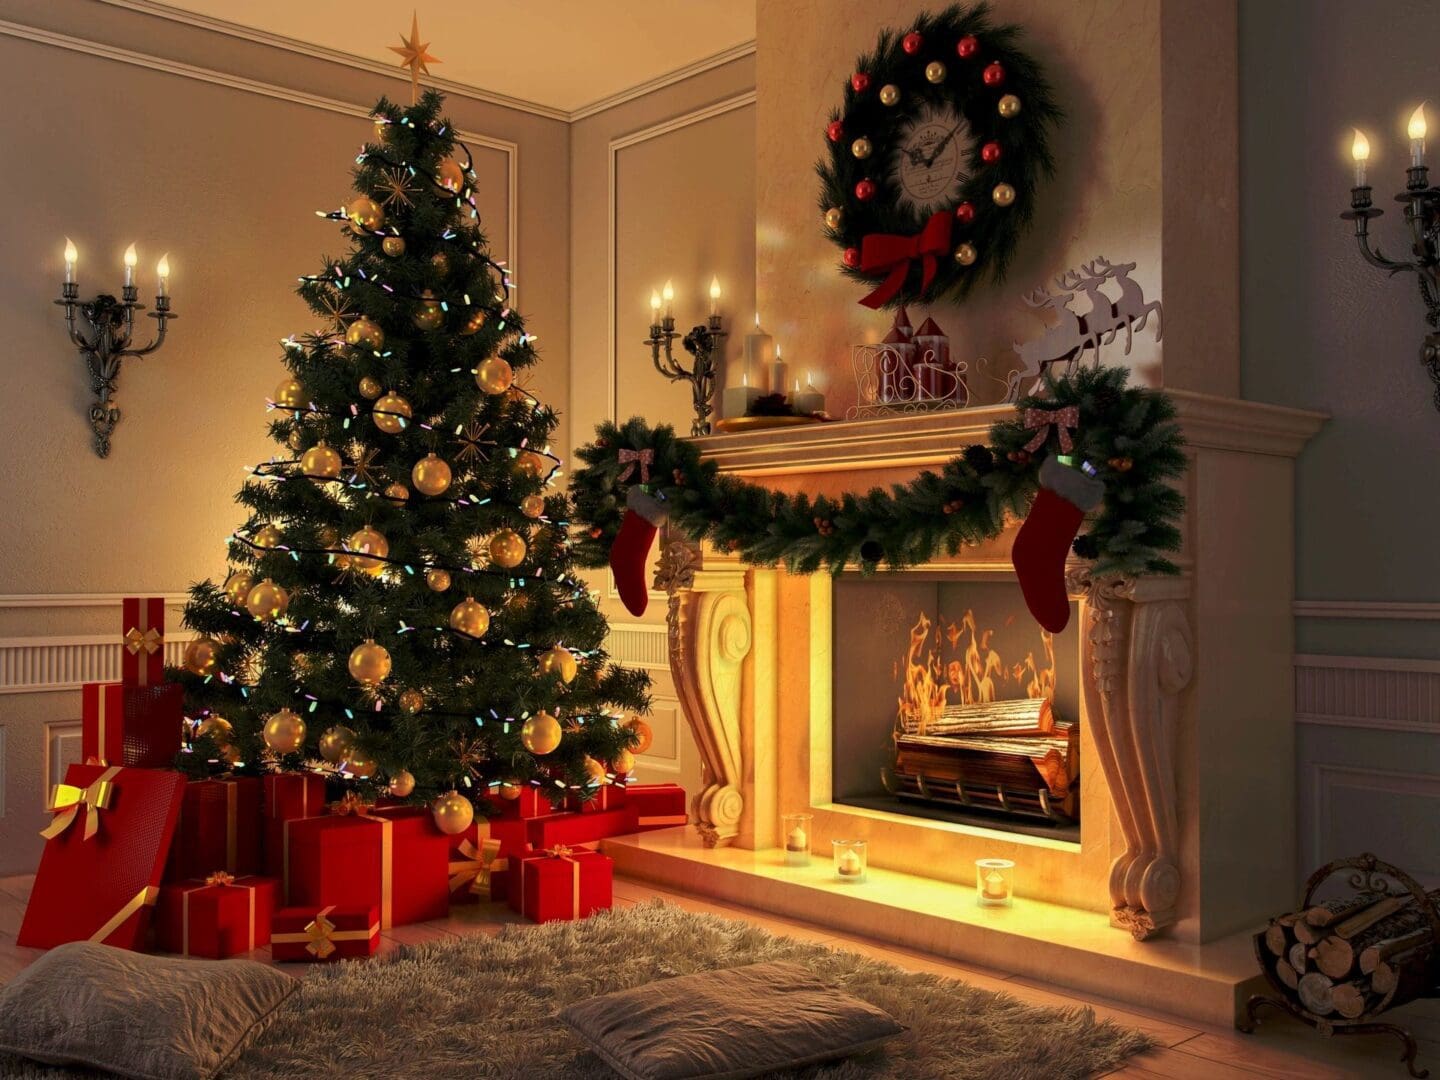 A christmas tree and presents in front of a fireplace.